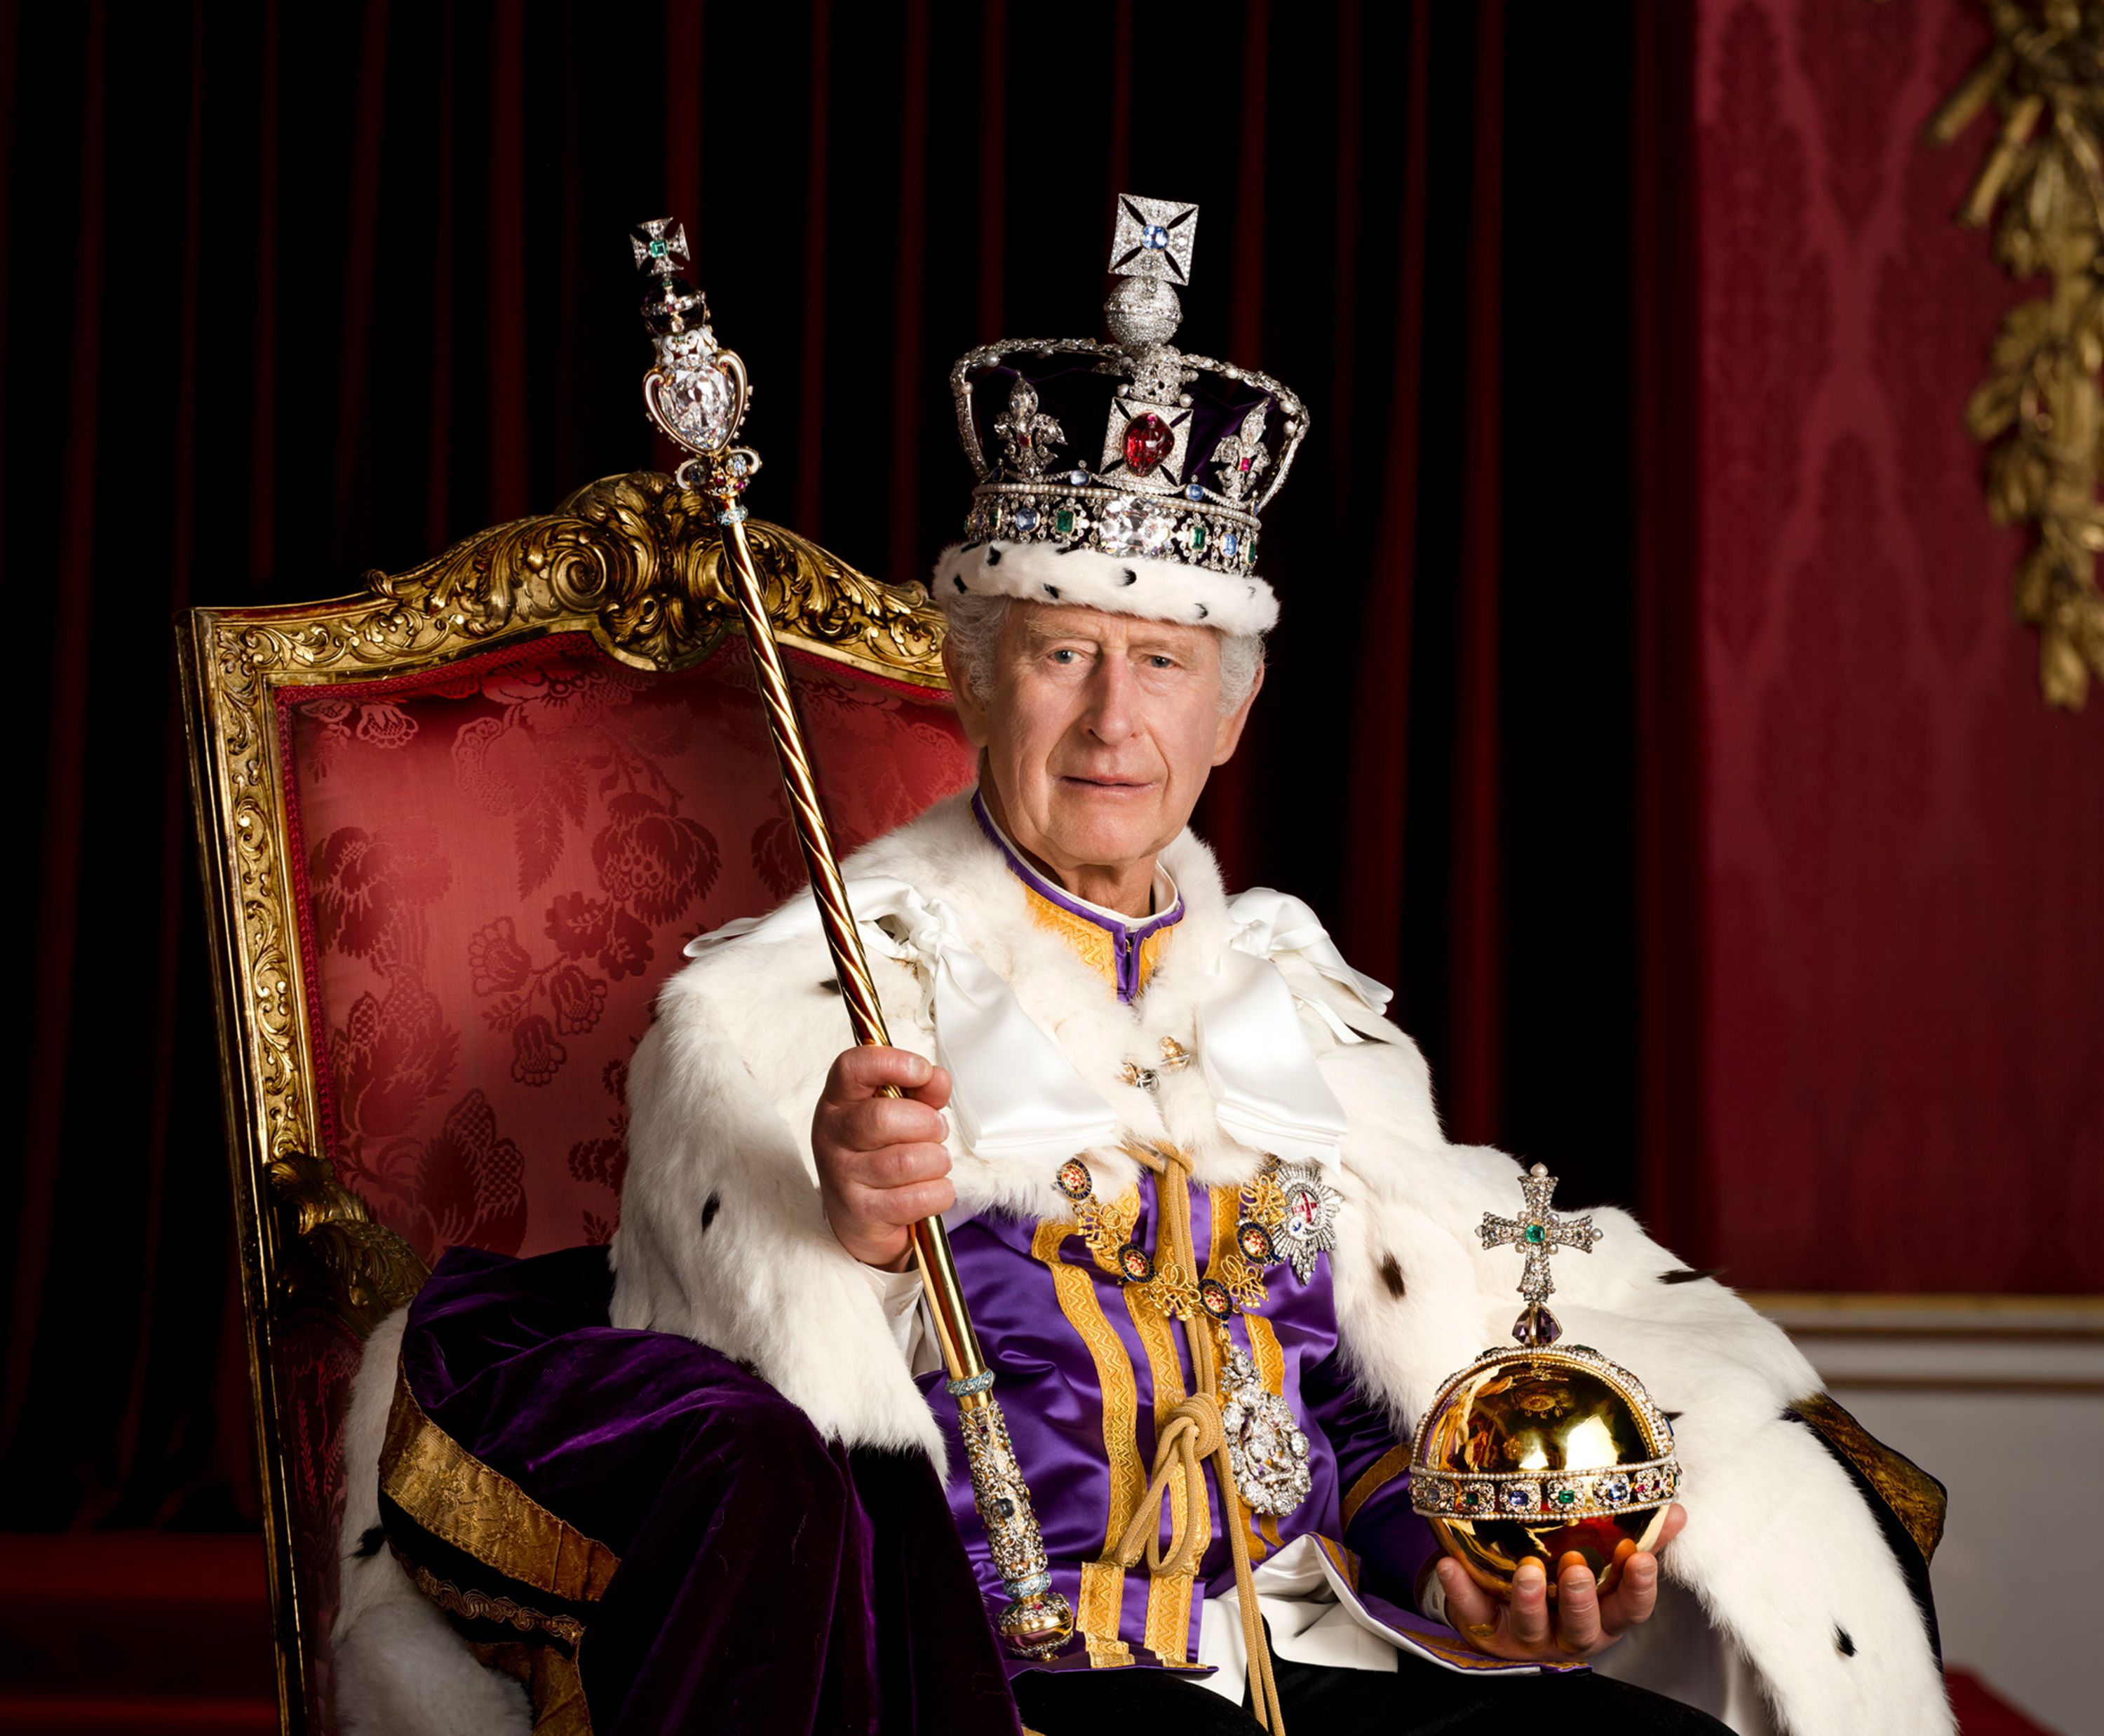 Britain's King Charles III <a href="index.php?page=&url=https%3A%2F%2Fwww.cnn.com%2F2023%2F05%2F08%2Fuk%2Fcoronation-official-portraits-intl-gbr-ckc%2Findex.html" target="_blank">poses for a portrait</a> in Buckingham Palace's Throne Room dressed in full regalia. He is wearing the Robe of Estate and the Imperial State Crown while holding the Sovereign's Orb and the Sovereign's Sceptre with Cross.